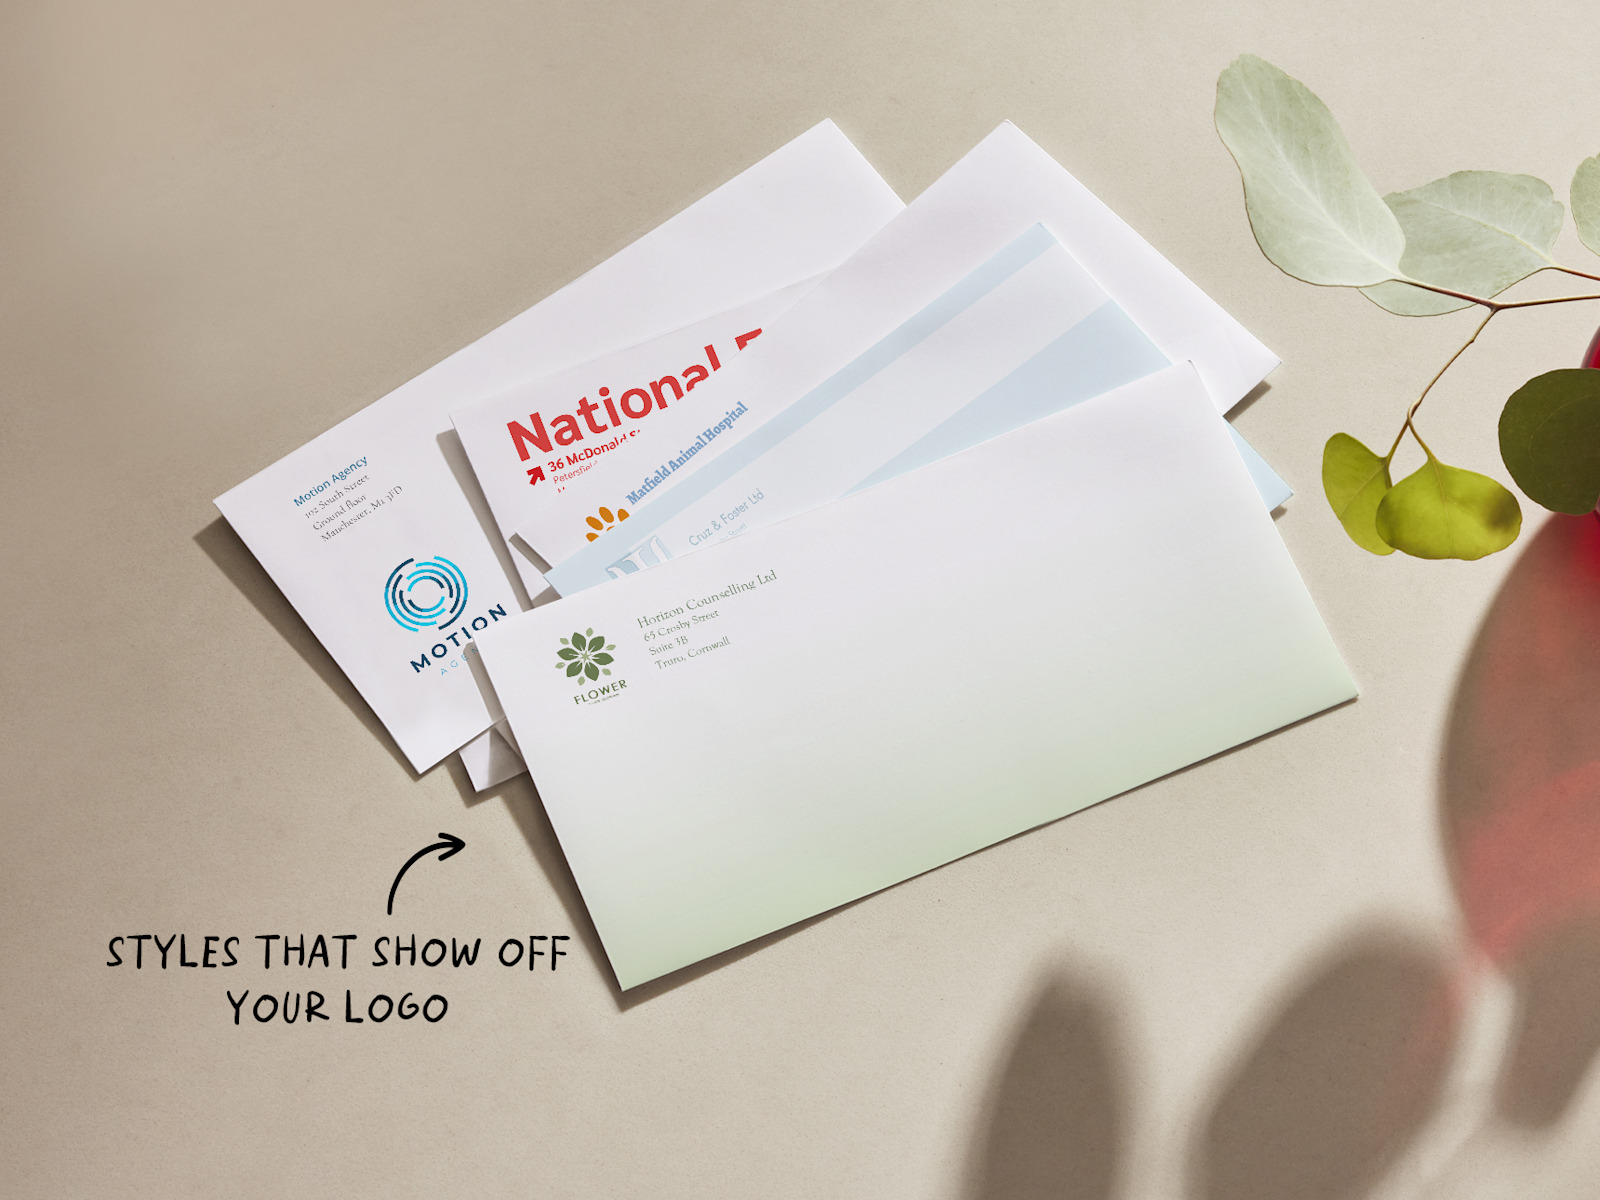 Custom DL envelopes showing different business designs. There is text that says envelopes come in different styles to show off your logo